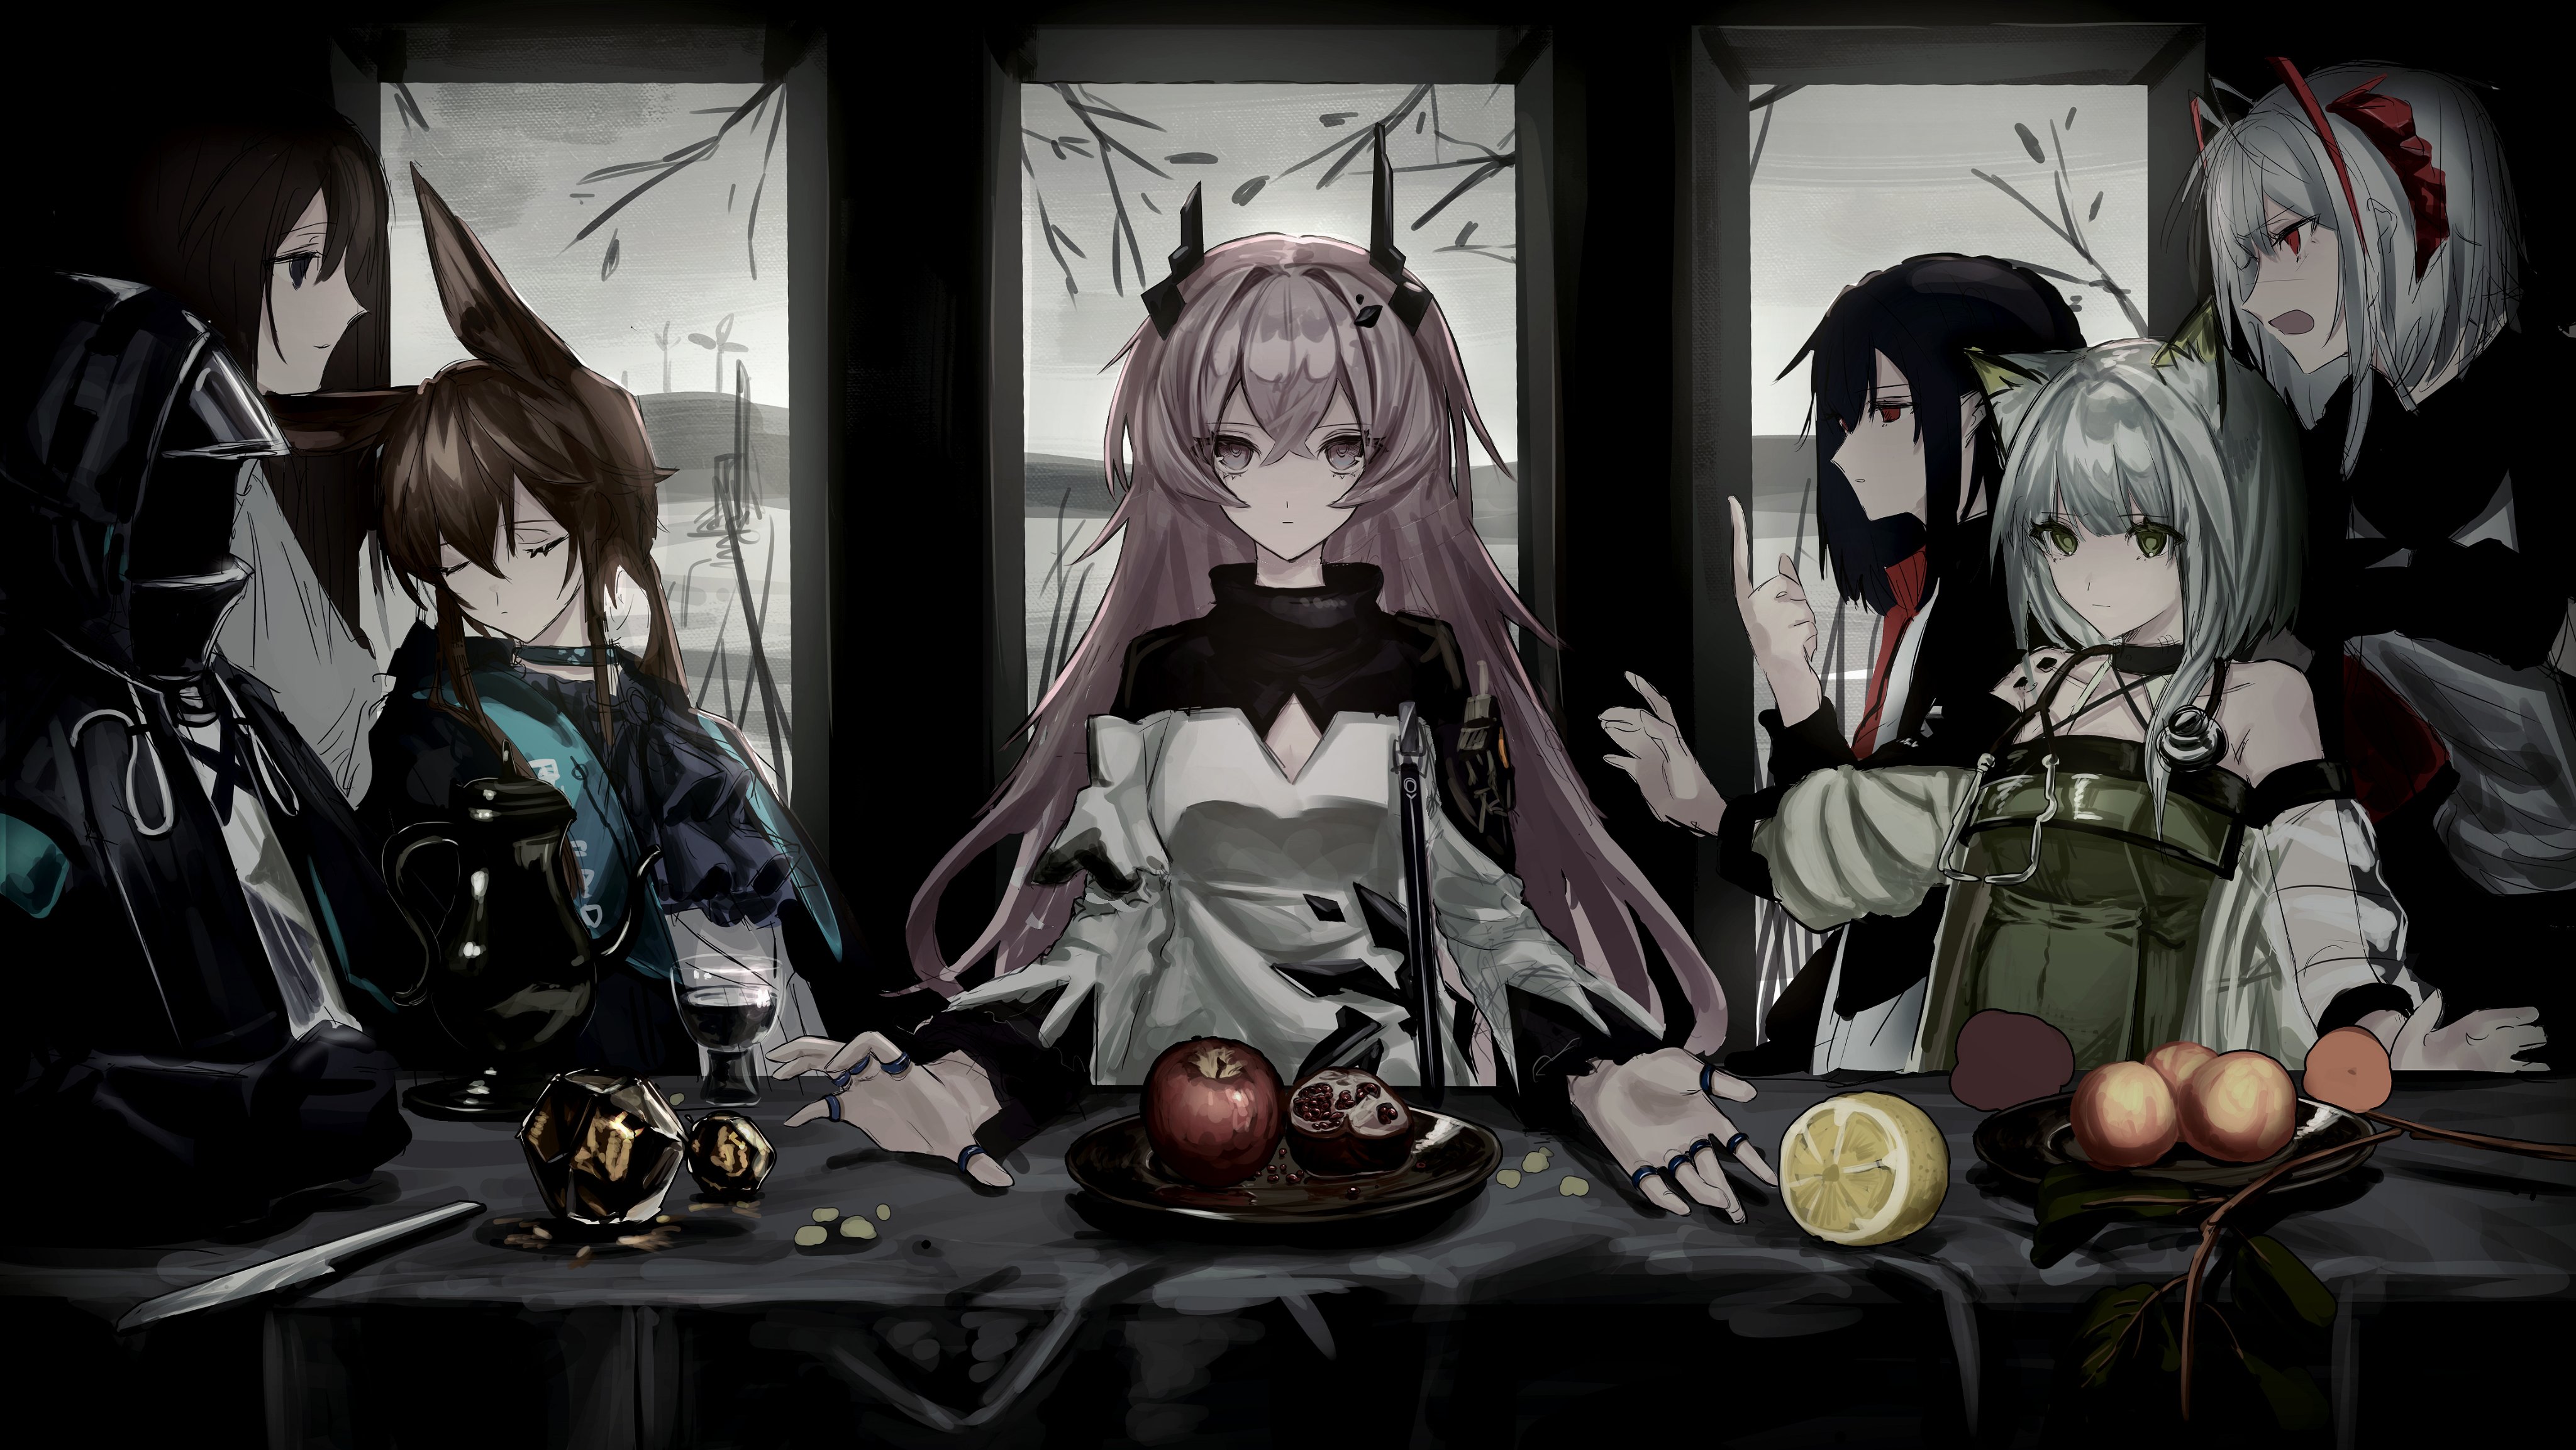 Anime 4096x2305 Arknights anime girls The Last Supper Doctor (Arknights) Amiya (Arknights) Kal'tsit (Arknights) W (Arknights) Theresa(Arknights) Priestess (Arknights) Closure (Arknights) standing fruit long hair closed eyes